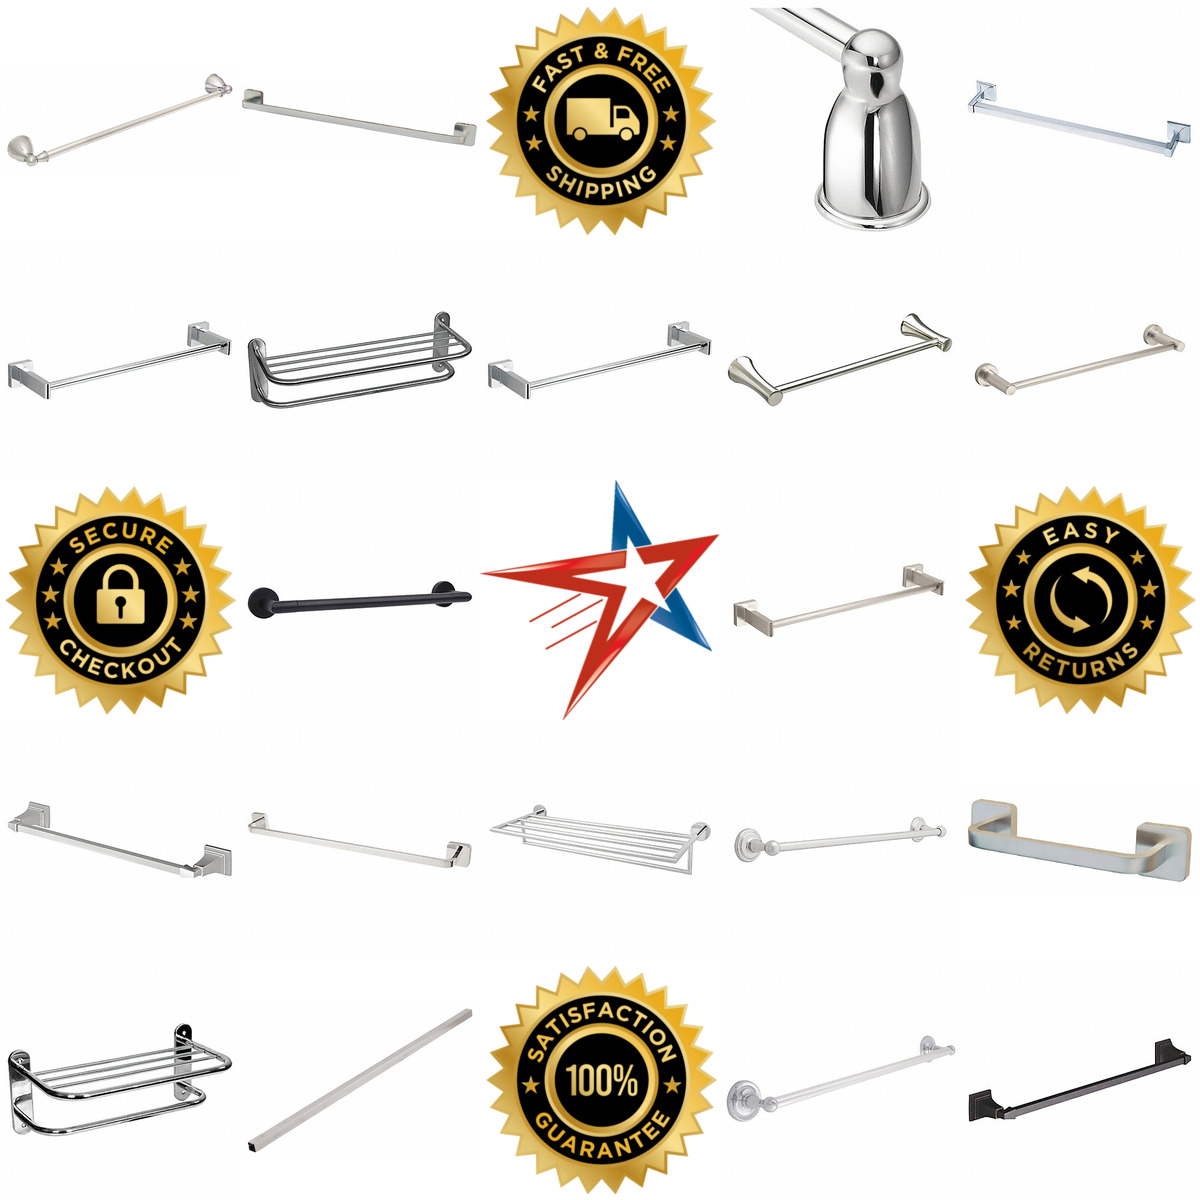 A selection of Towel Bars products on GoVets